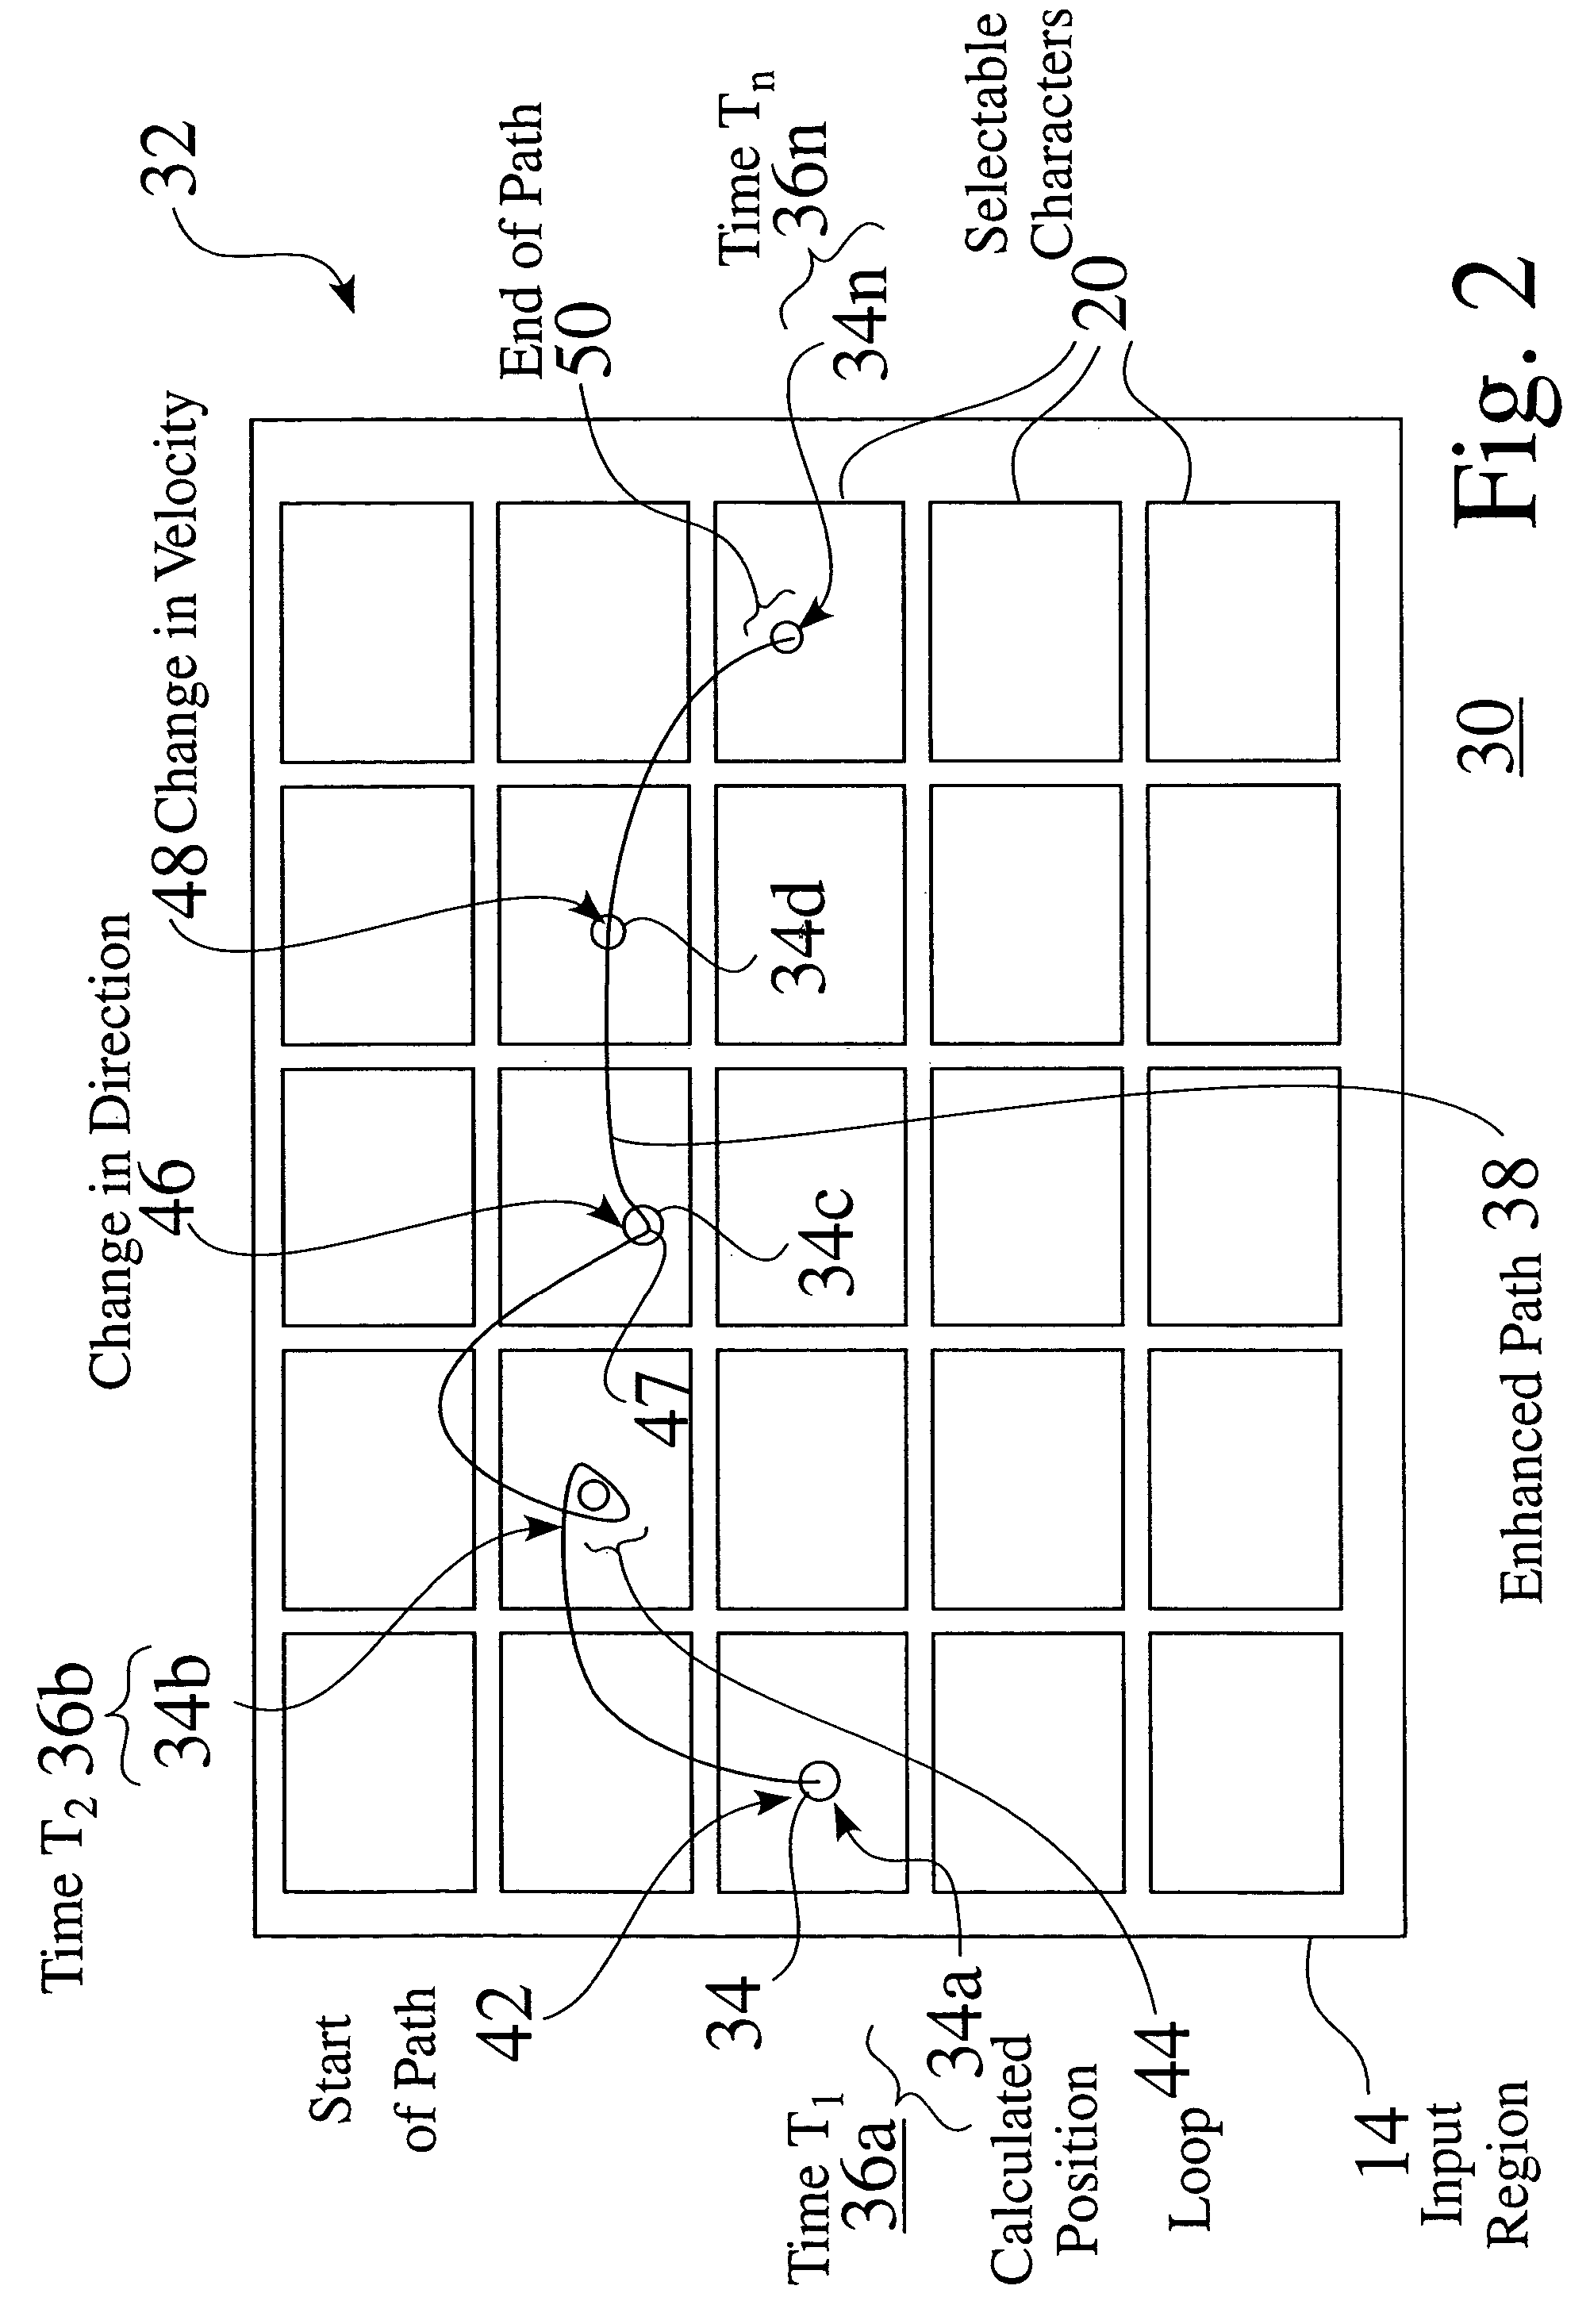 Selective input system based on tracking of motion parameters of an input device